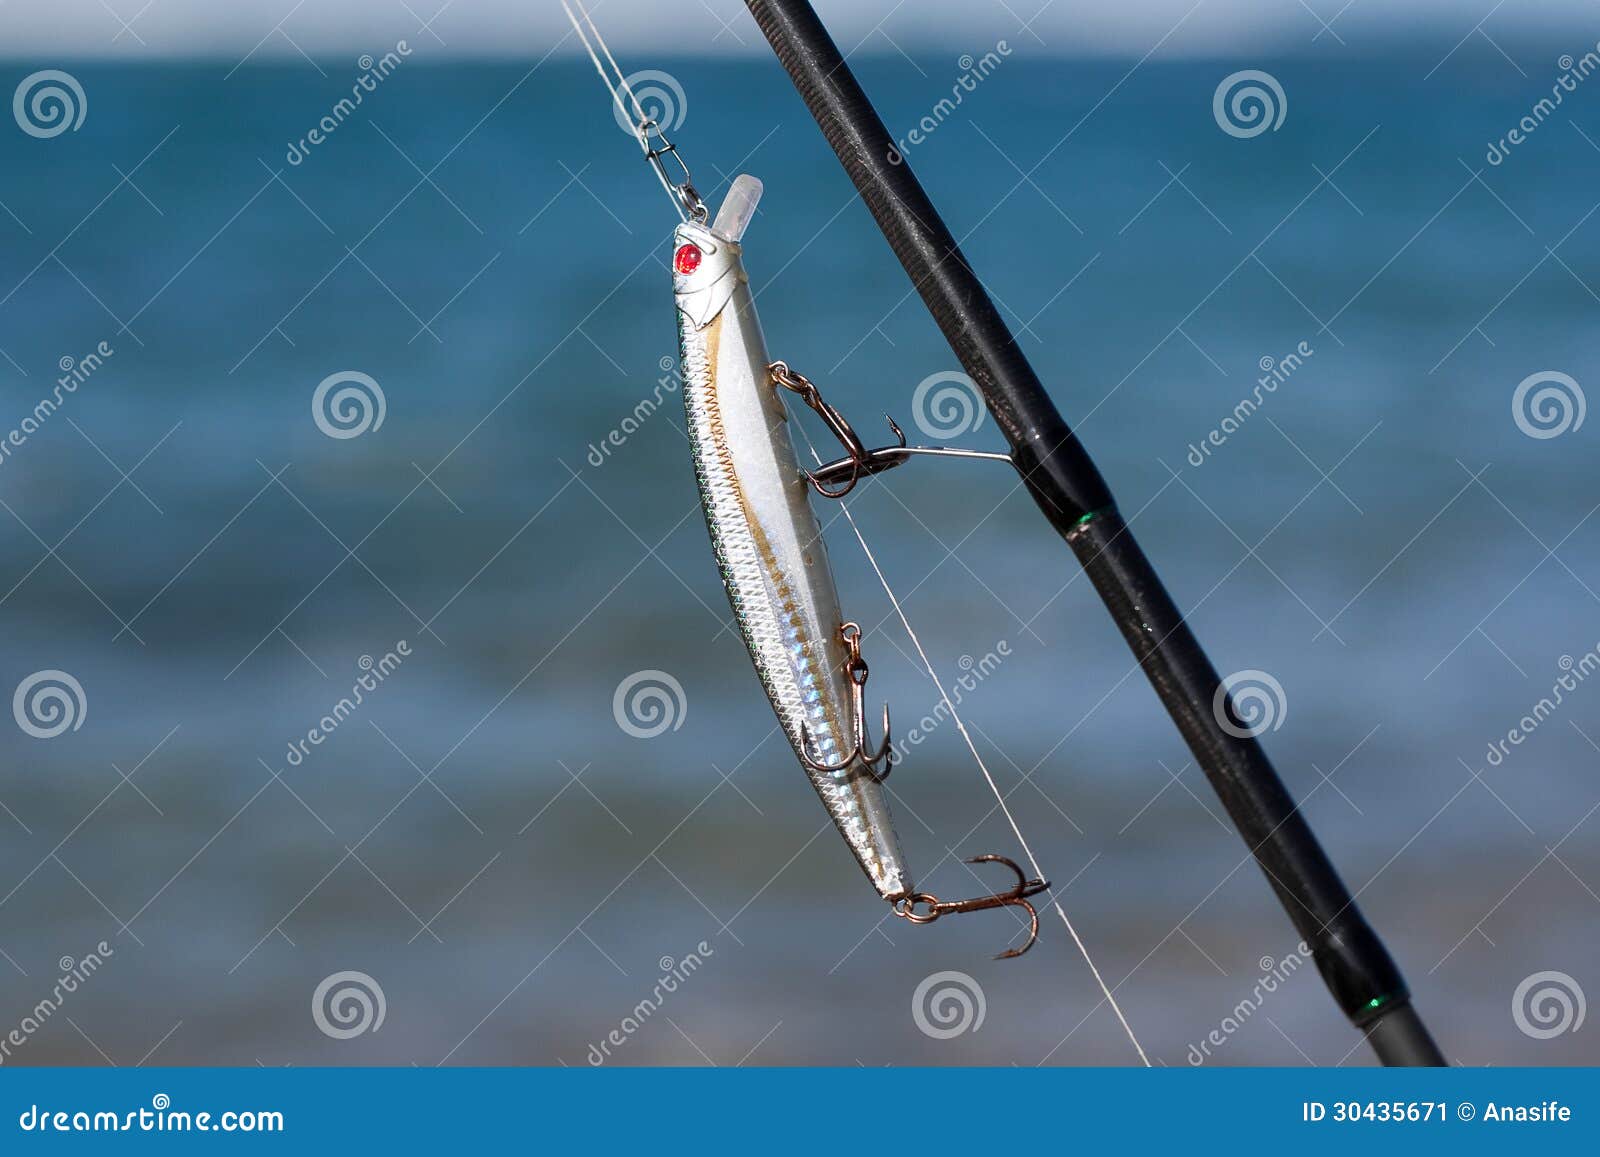 Silver Fishing Lure in Fishing Rod Stock Image - Image of sport, equipment:  30435671